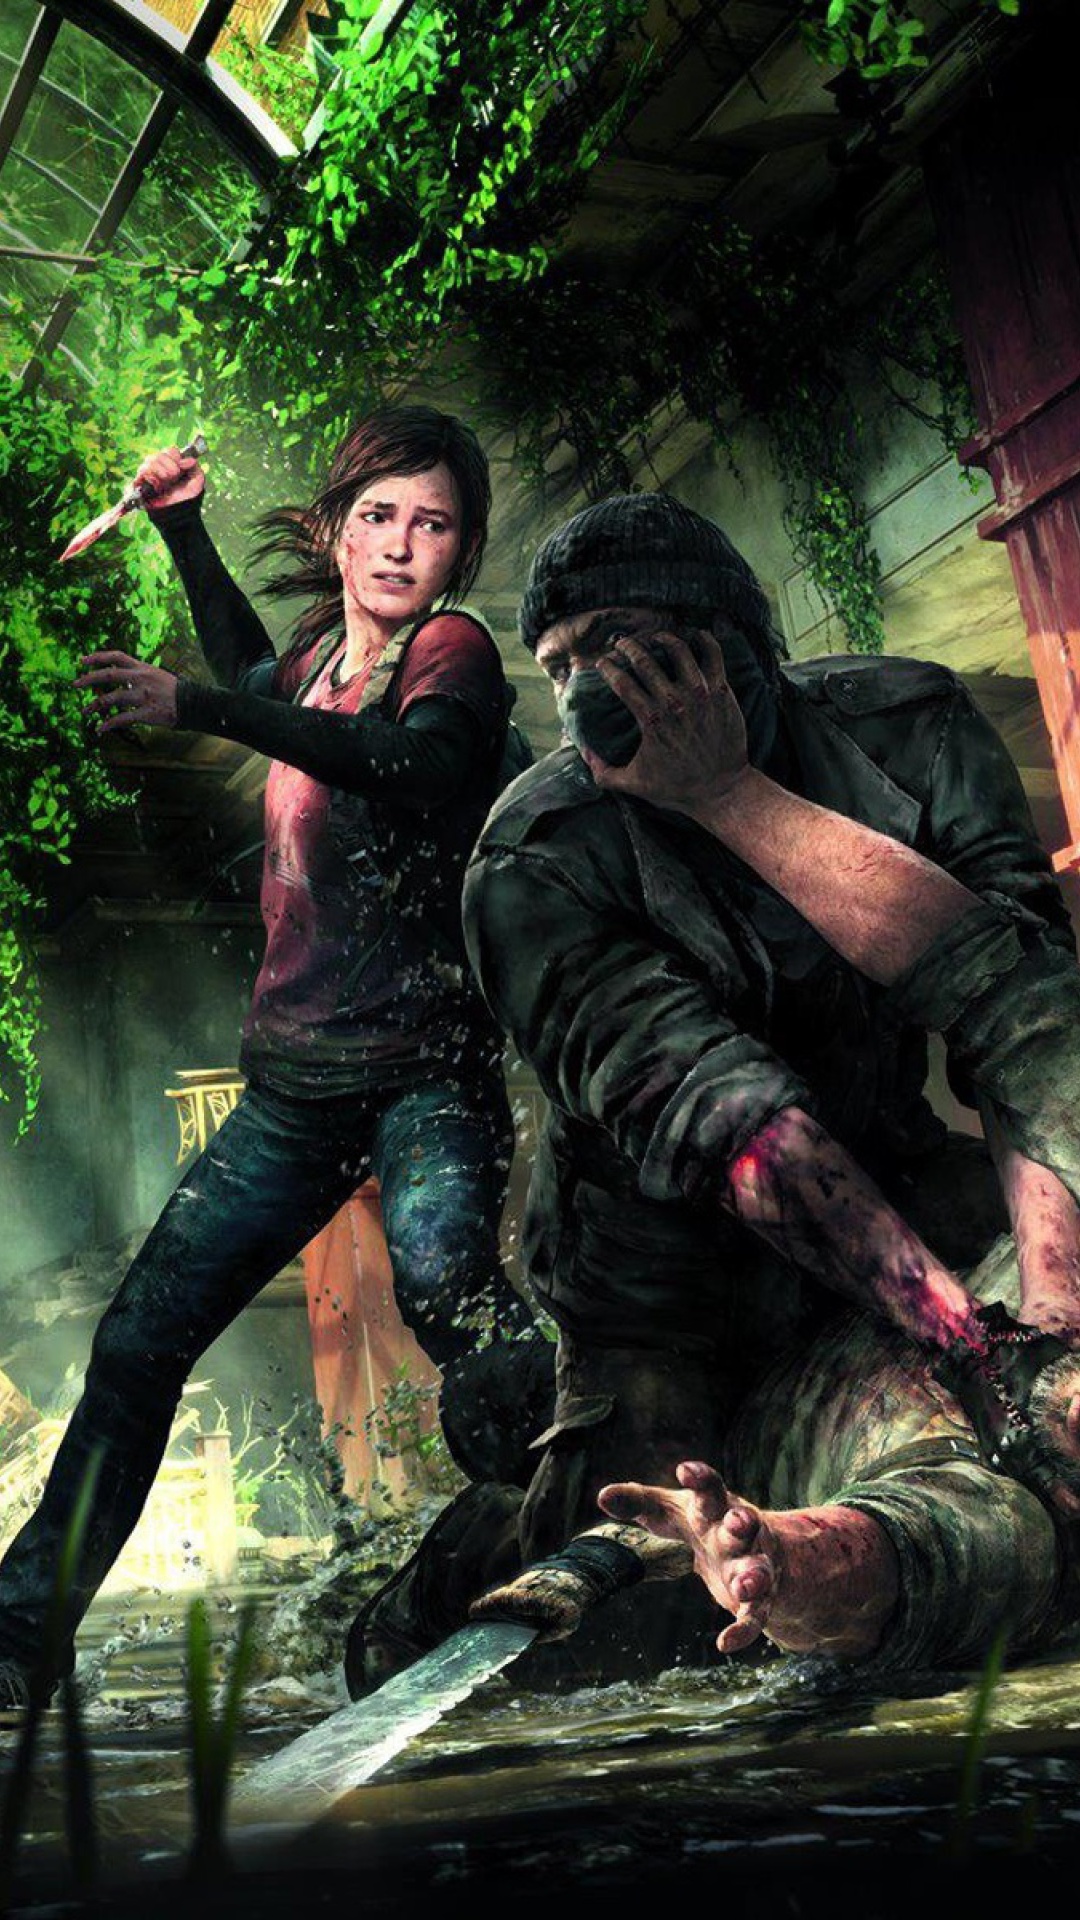 The Last Of Us Naughty Dog for Playstation 3 wallpaper 1080x1920